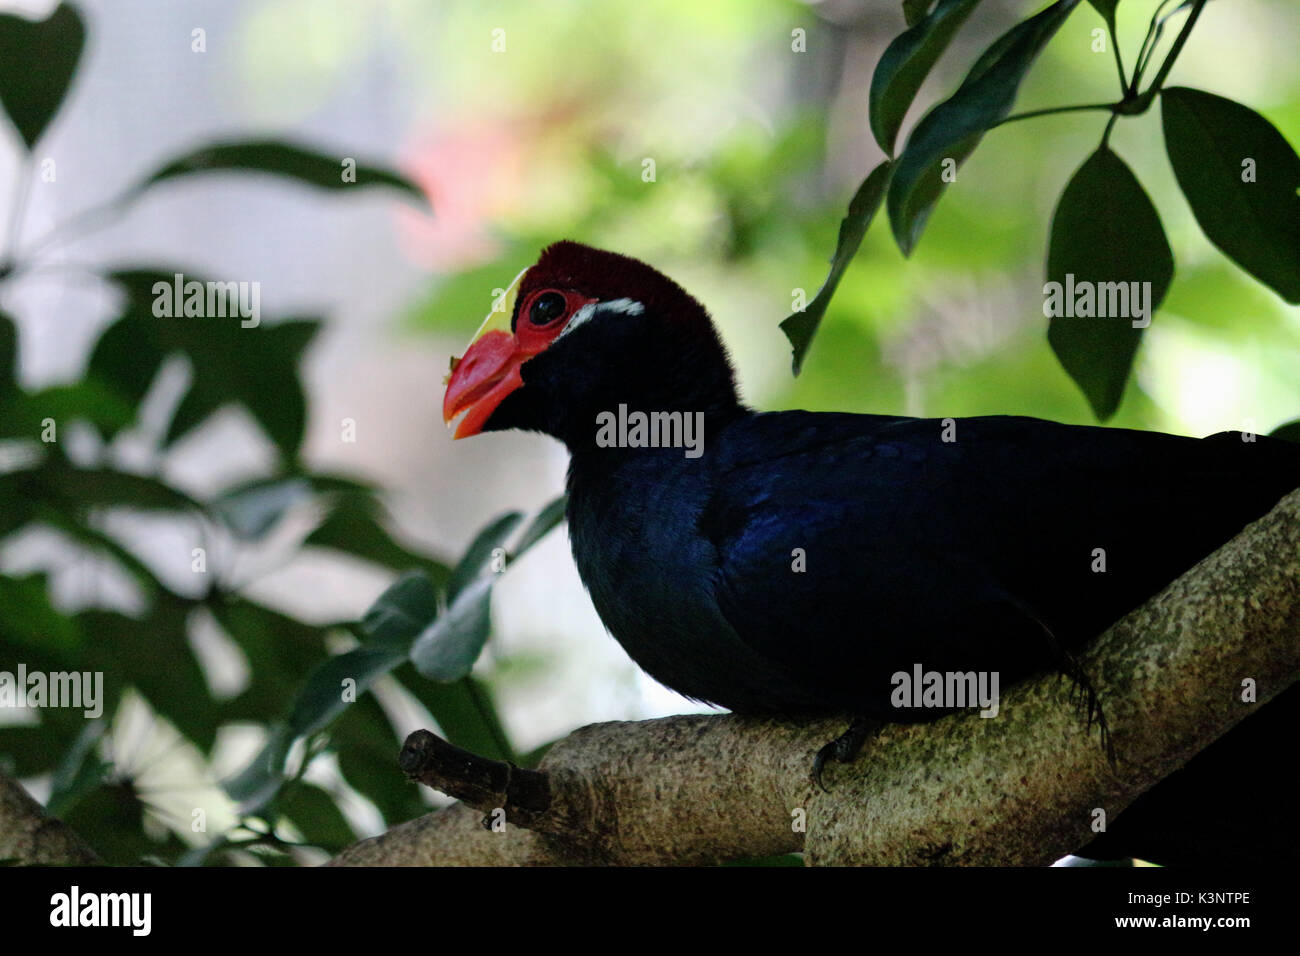 A Violet Turaco Bird Perched on a Tree Branch Stock Photo